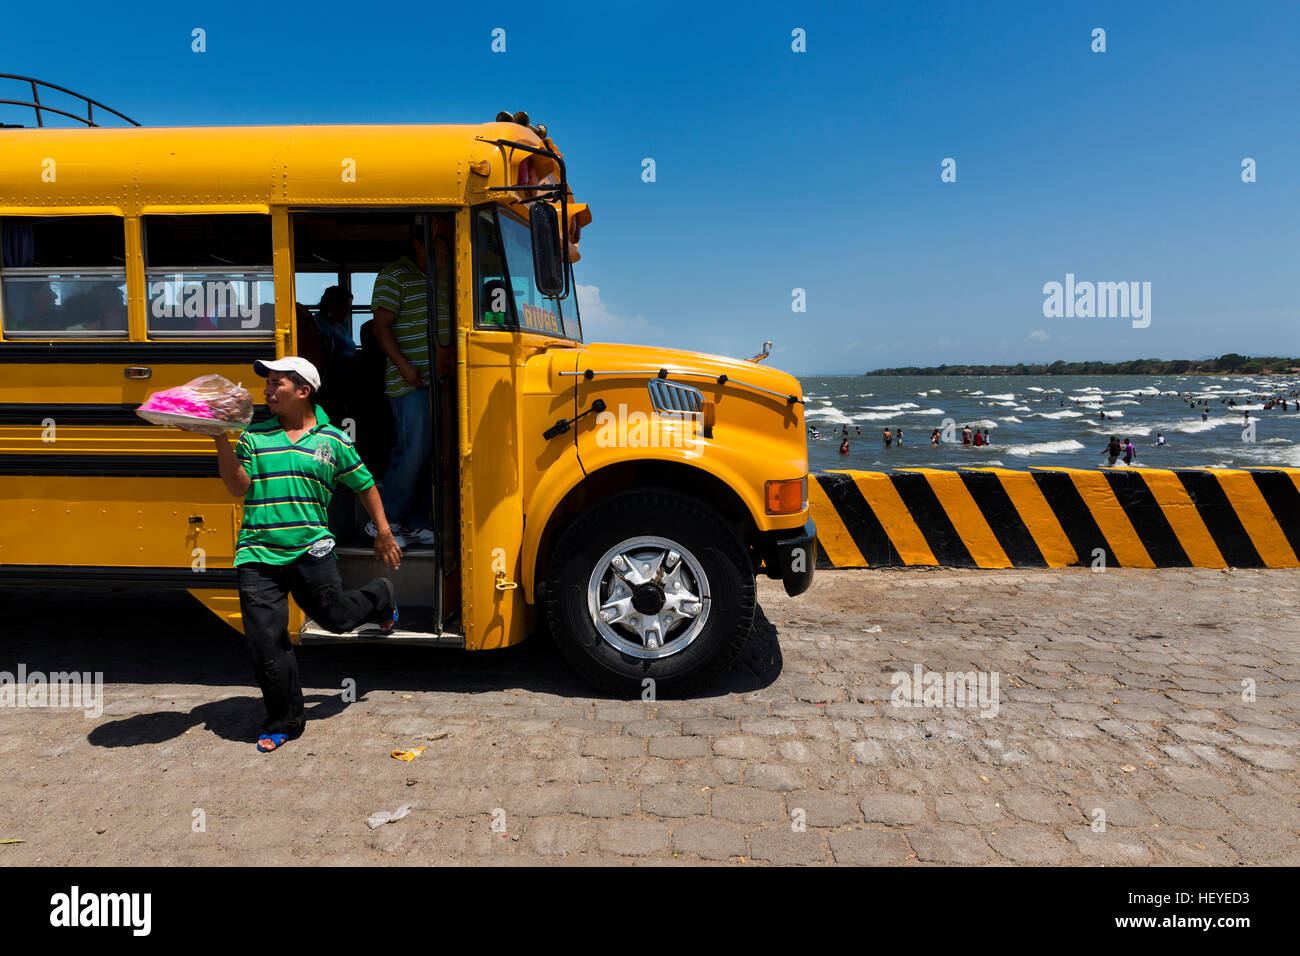 San Jorge, Nicaragua - April 11, 2014: Food vendor leaving a bus in the Ferry Terminal in the town of San Jorge in the shores of the Lake Nicaragua Stock Photo